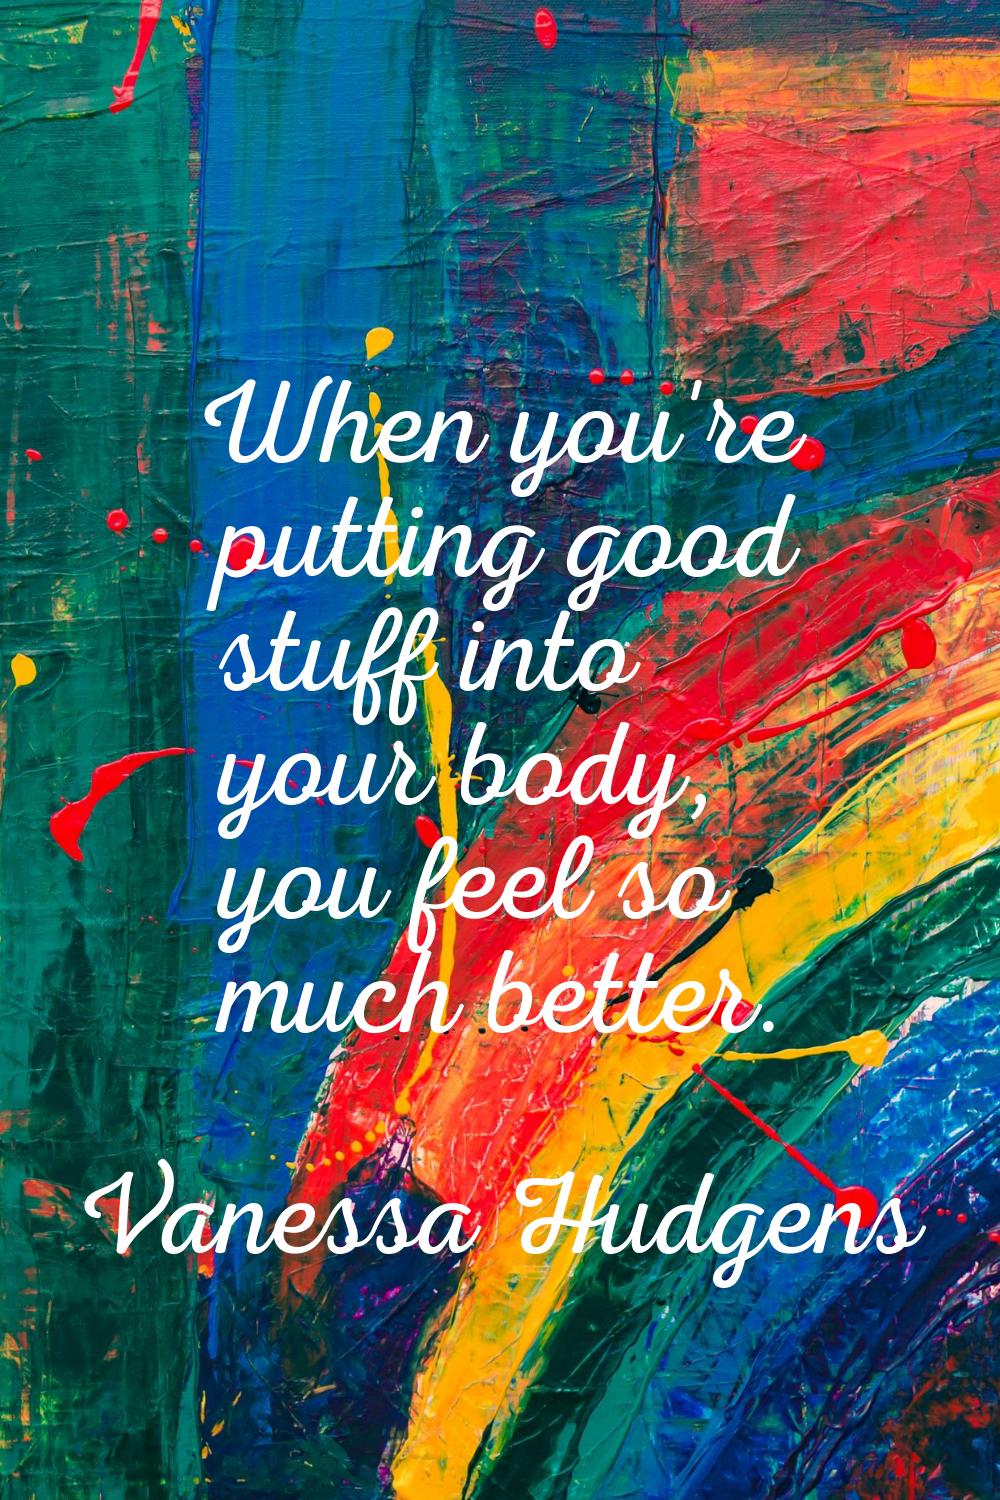 When you're putting good stuff into your body, you feel so much better.